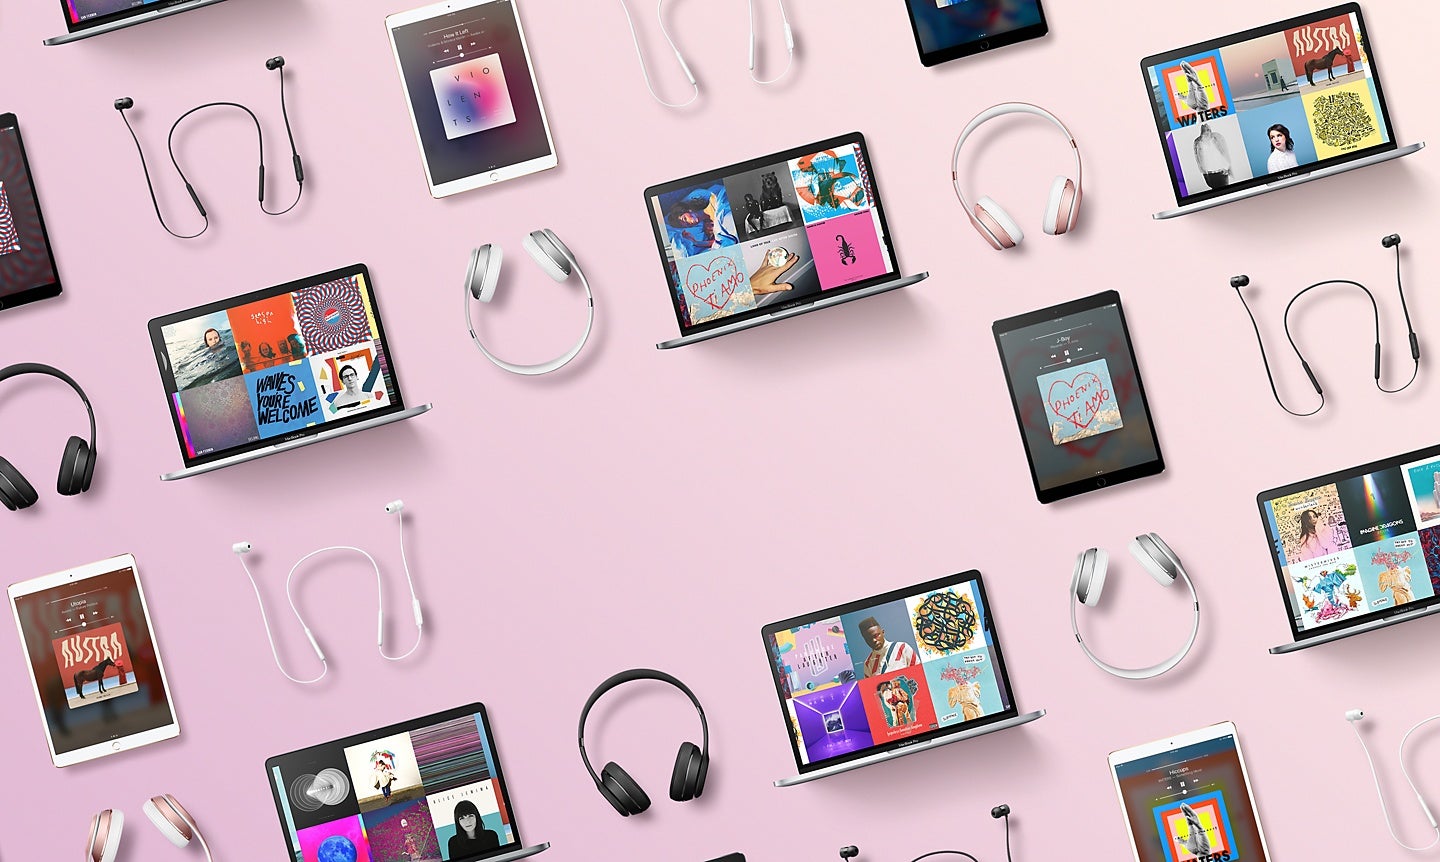 Apple offers free Beats earphones to teachers and students buying a new iPad Pro